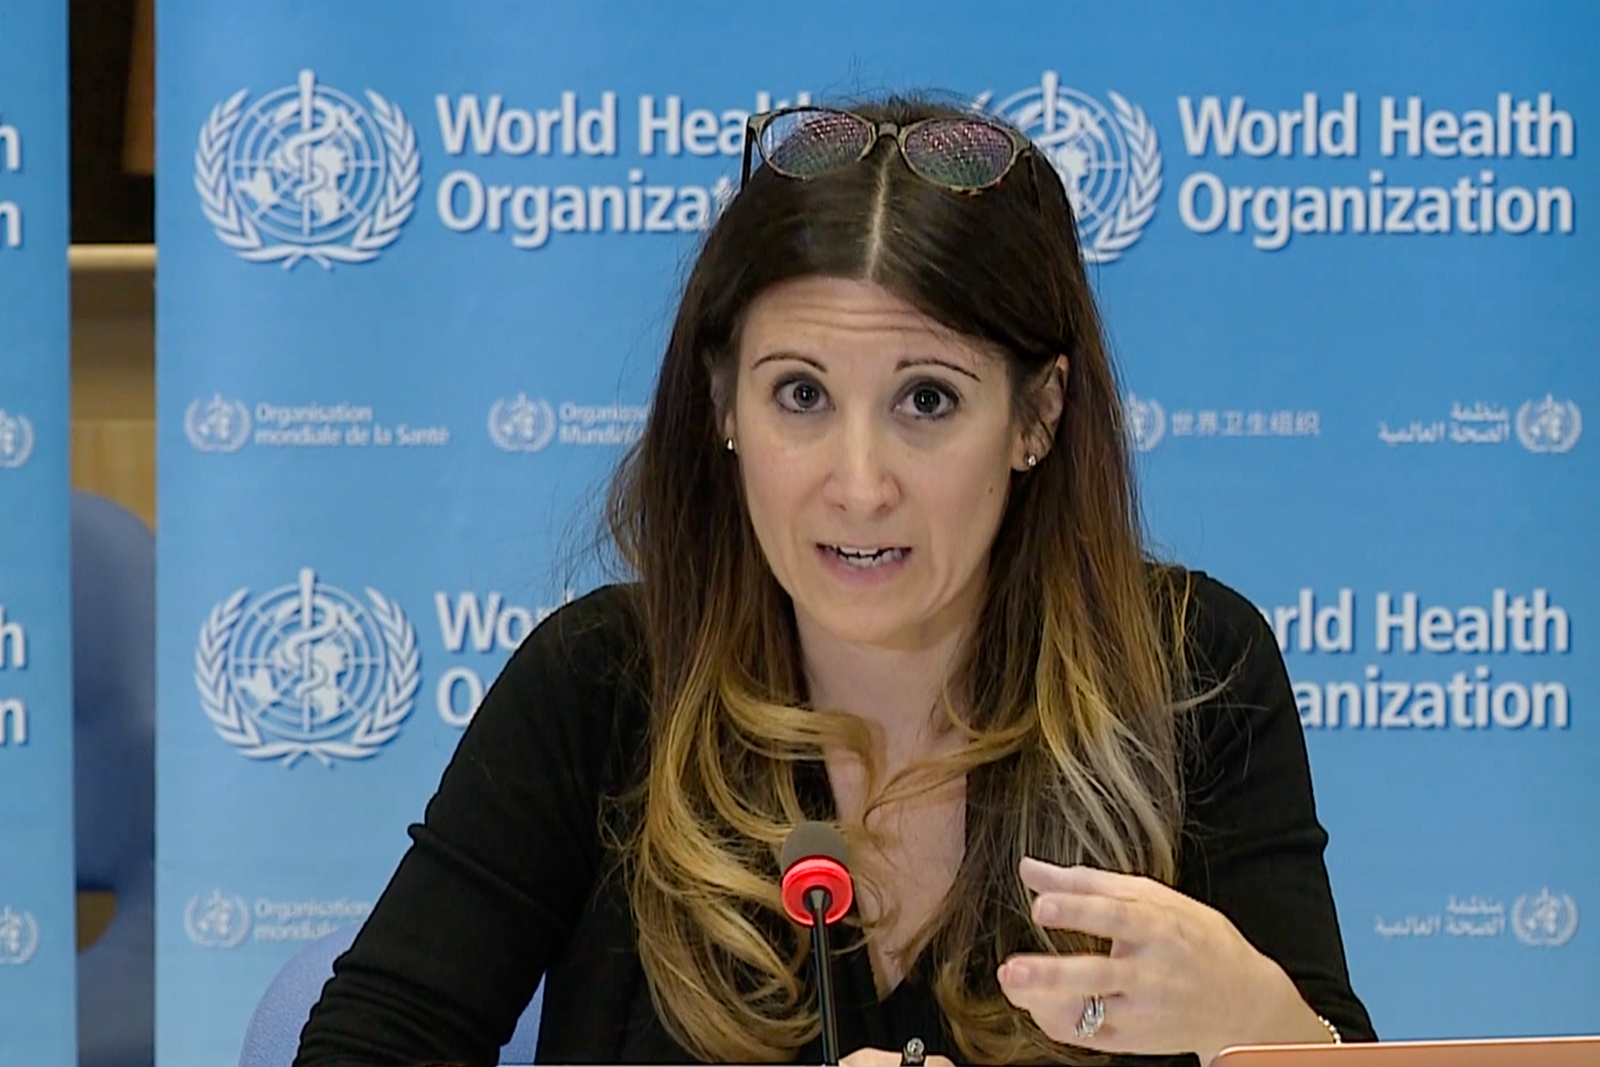 A screenshot from a video published by the World Health Organization shows that WHO Technical Leader Maria Van Kerkhove spoke at a virtual news briefing about COVID-19 from the WHO center in Geneva on Monday (April 6th).